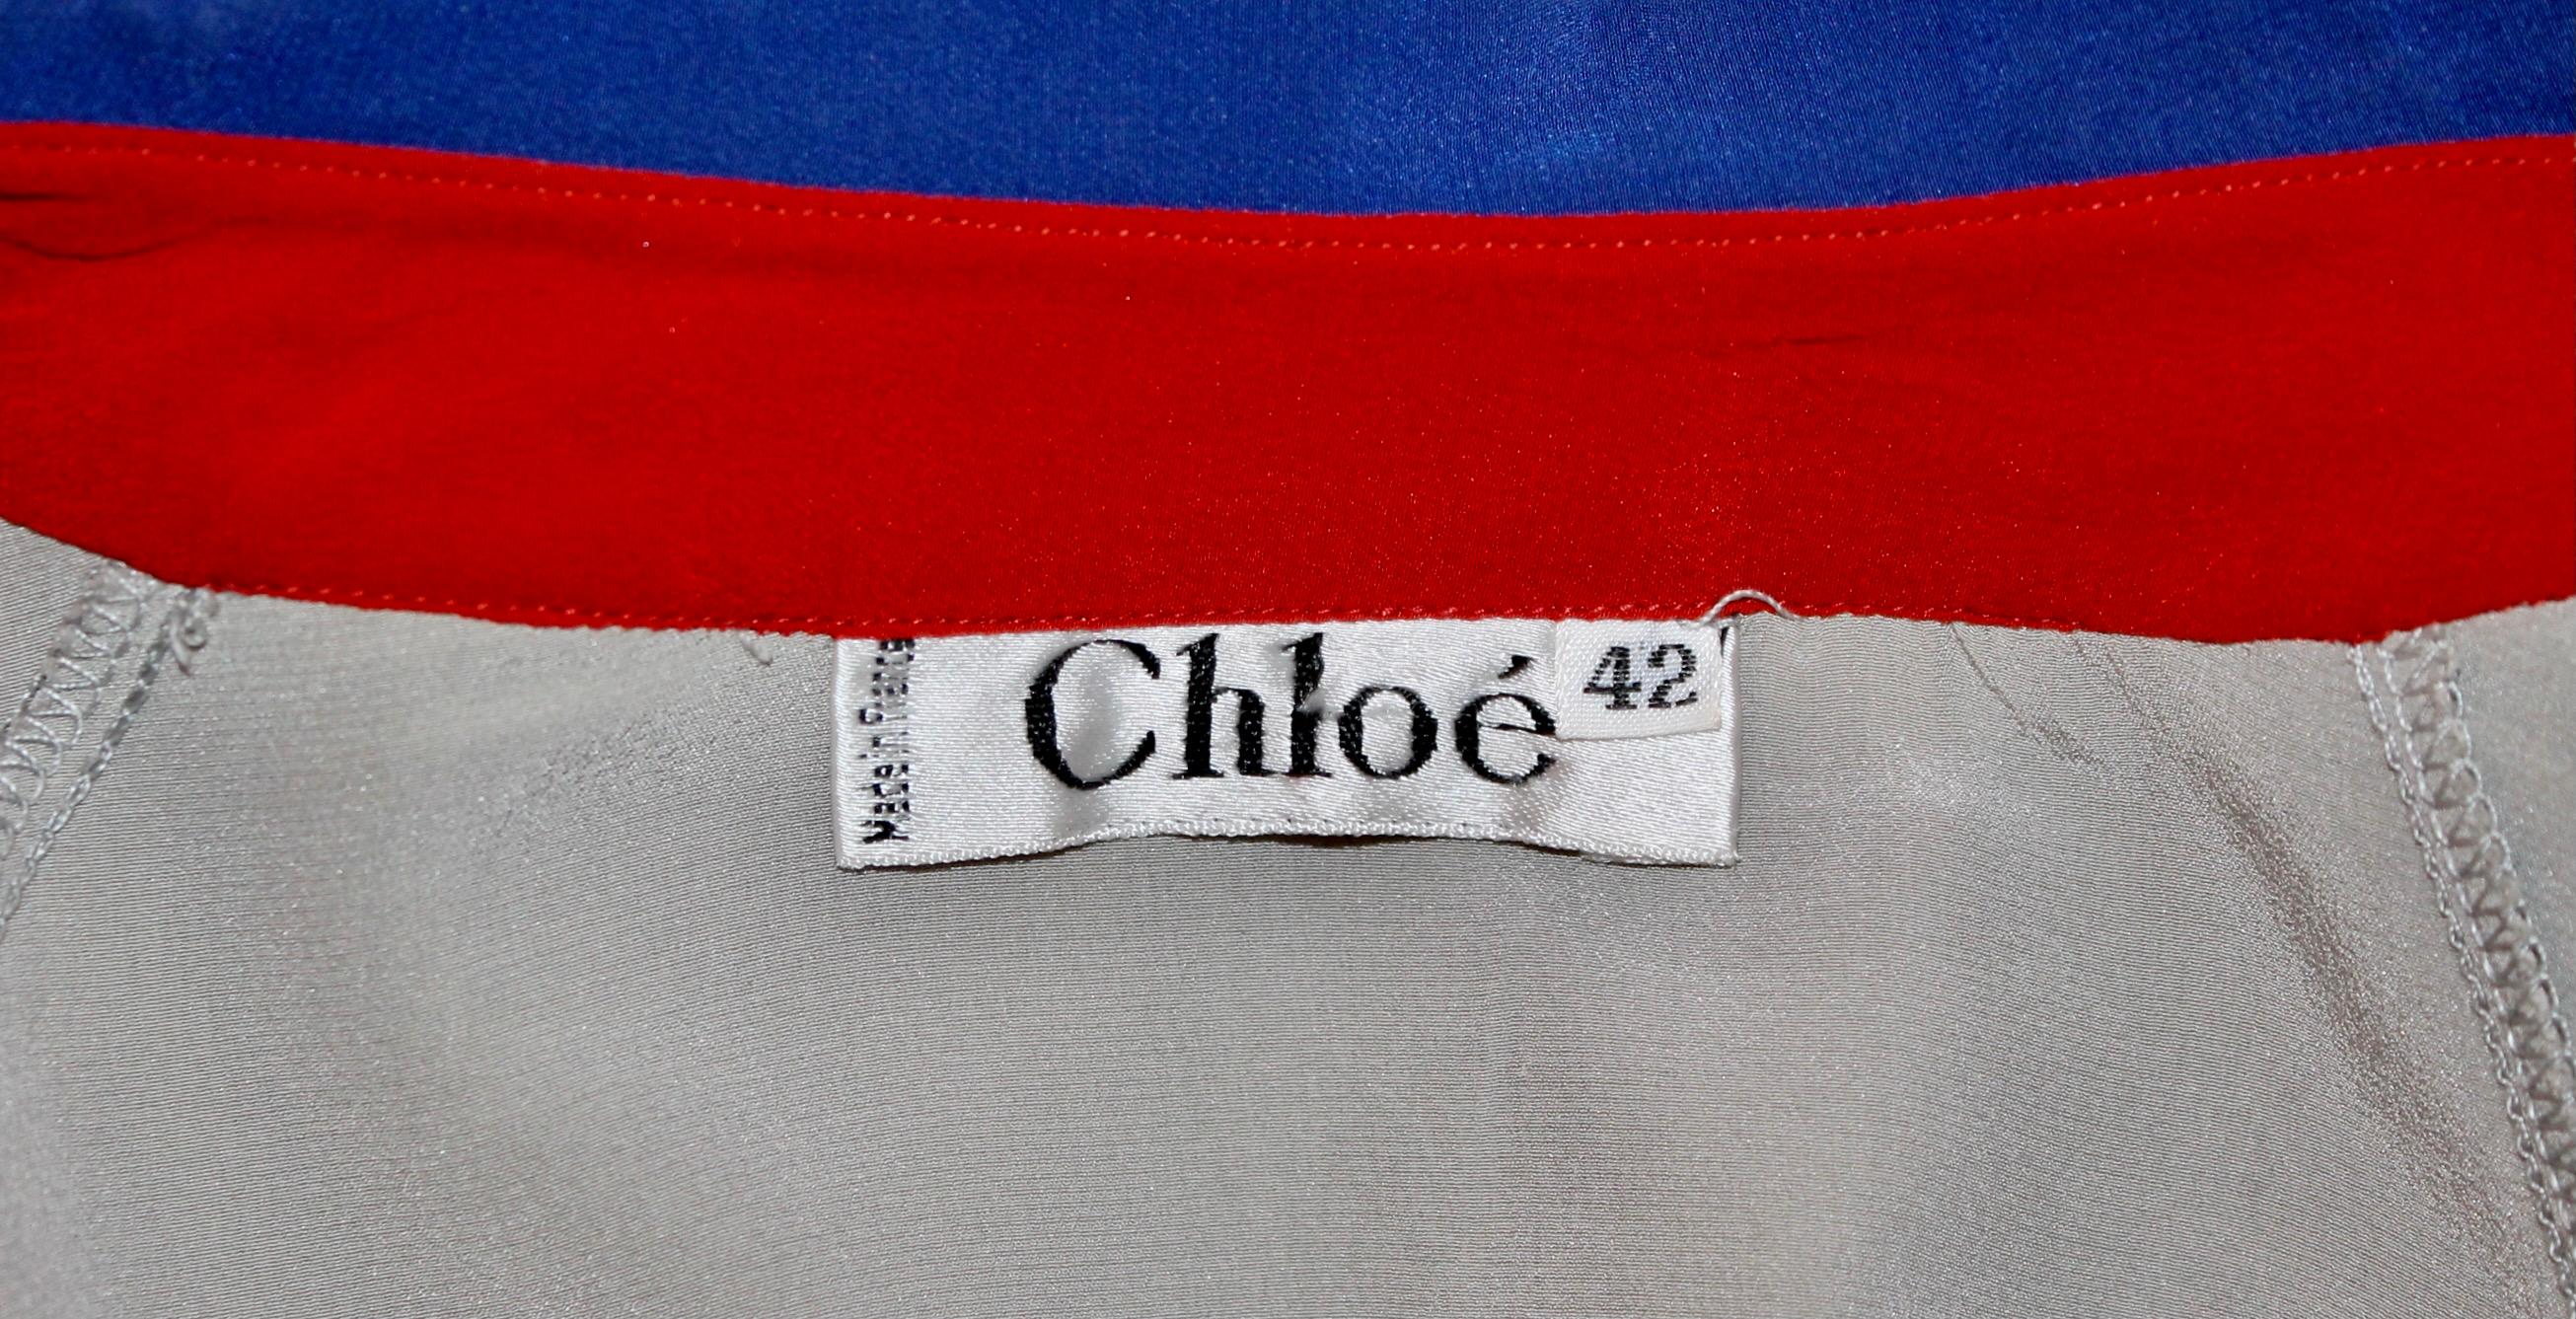 Chloe Blouse Military Inspired For Sale 4